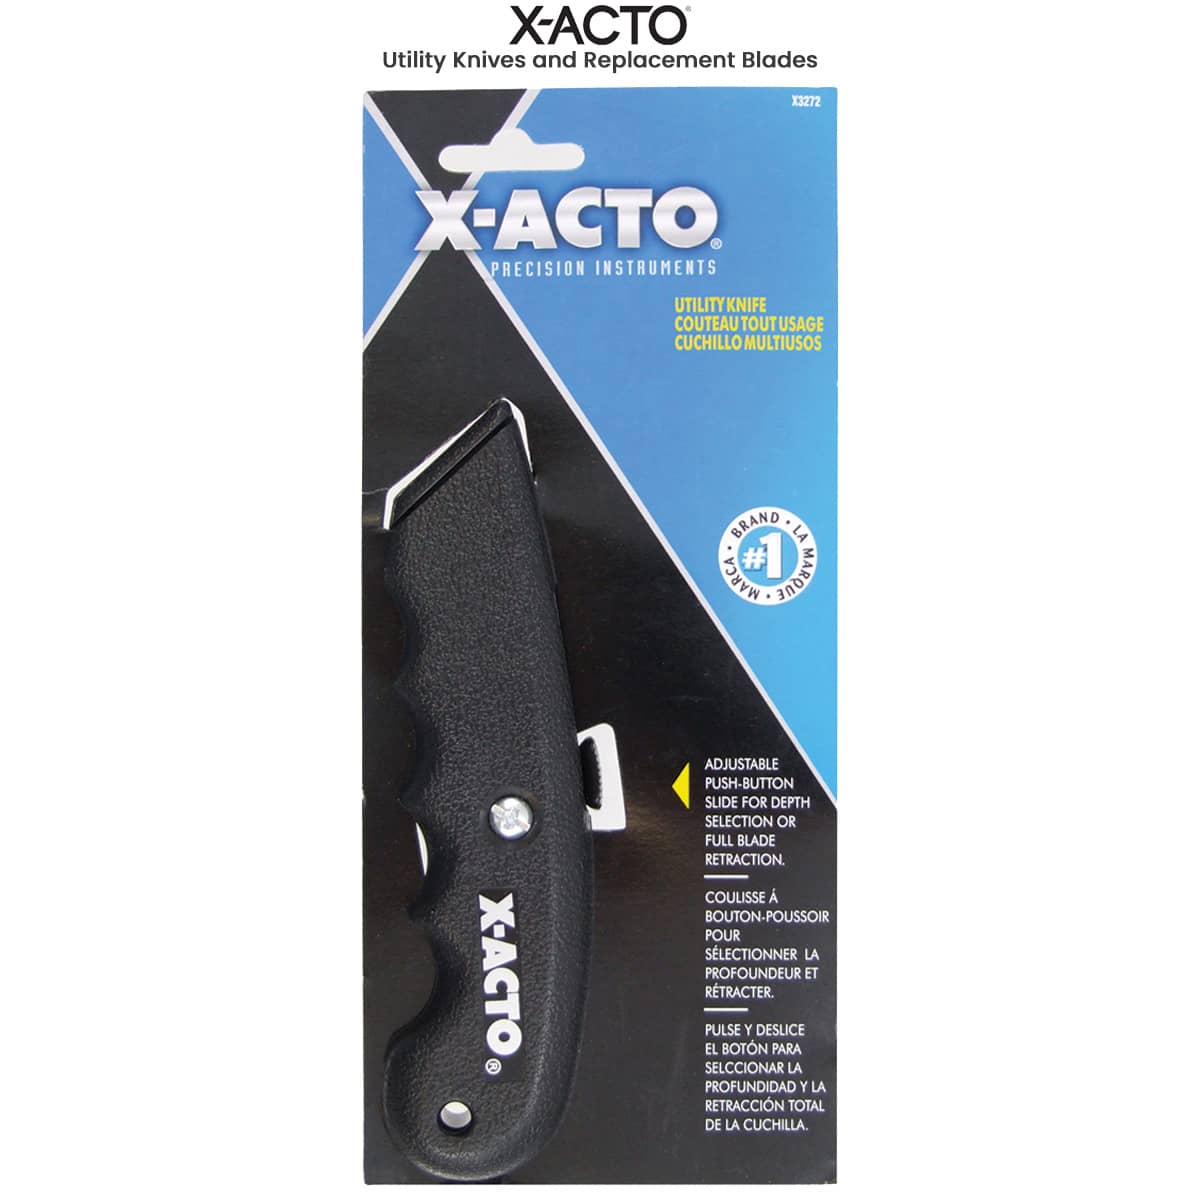 Soft Grip Xacto Style Precision Utility Cutter